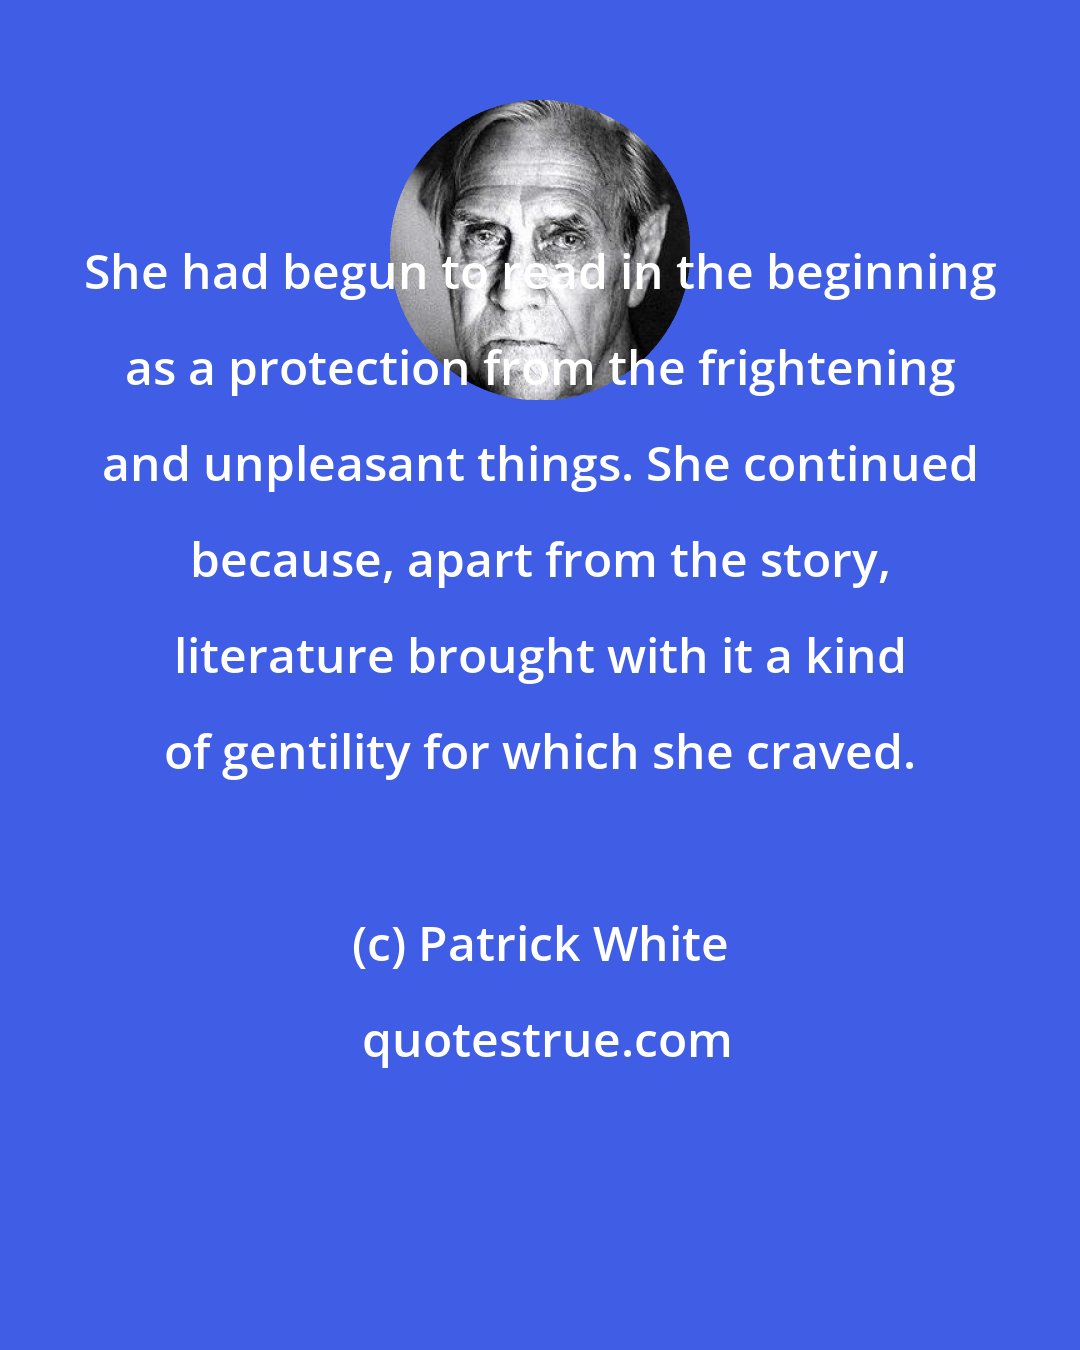 Patrick White: She had begun to read in the beginning as a protection from the frightening and unpleasant things. She continued because, apart from the story, literature brought with it a kind of gentility for which she craved.